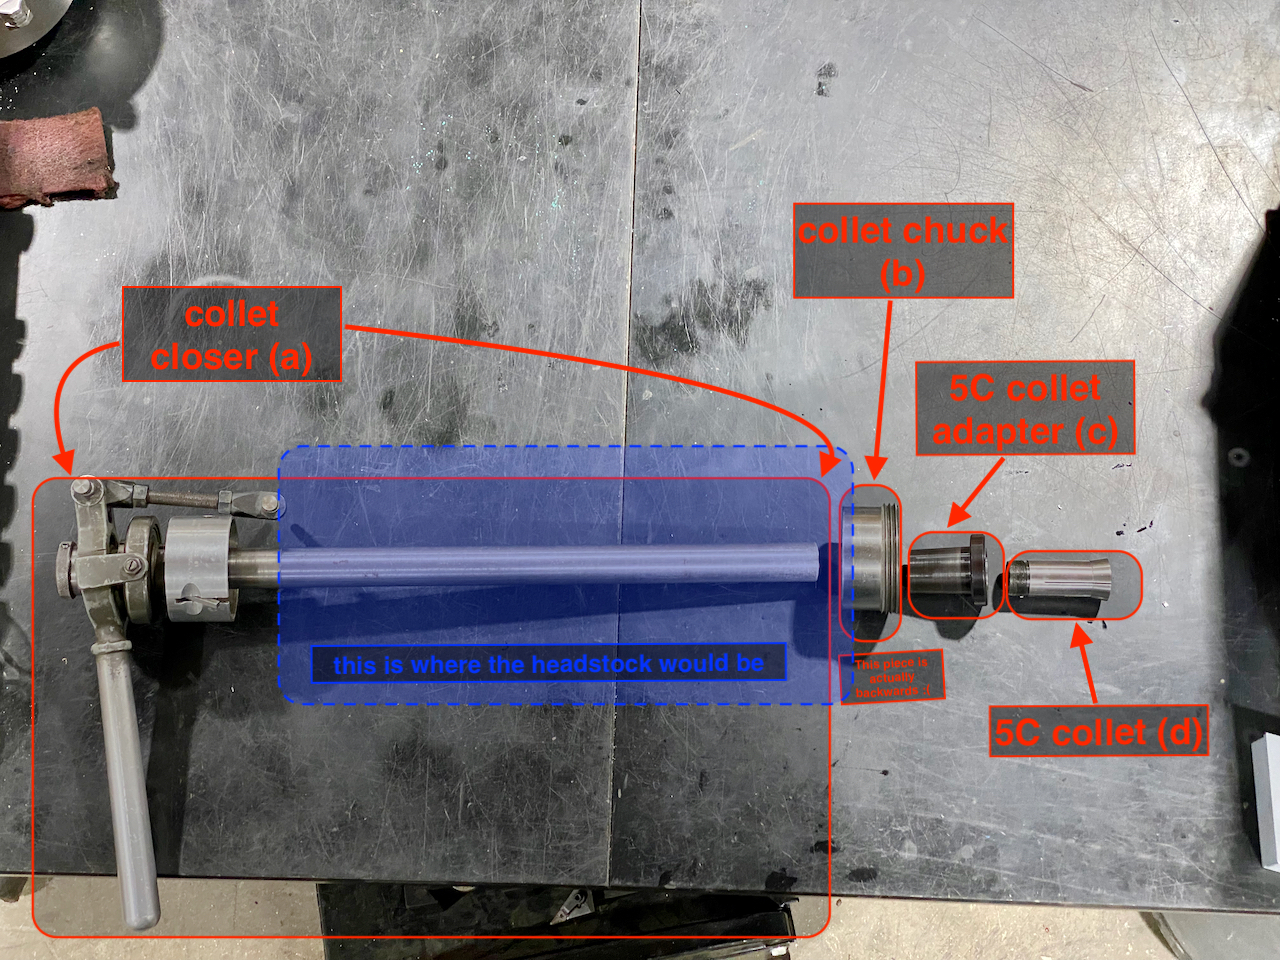 Overview of the Logan 5C collet closer assembly